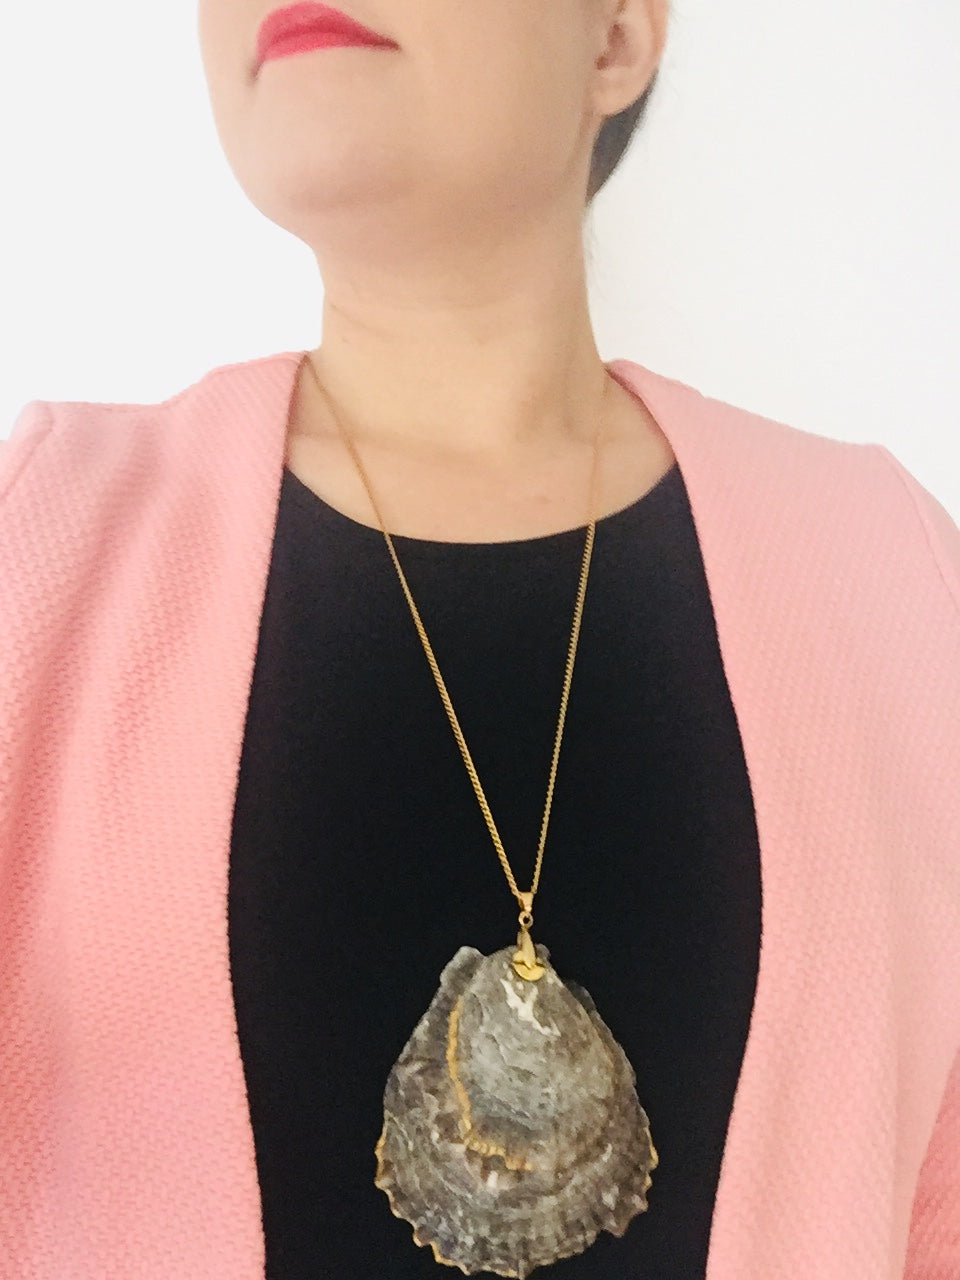 Shell Necklace "Lilly"